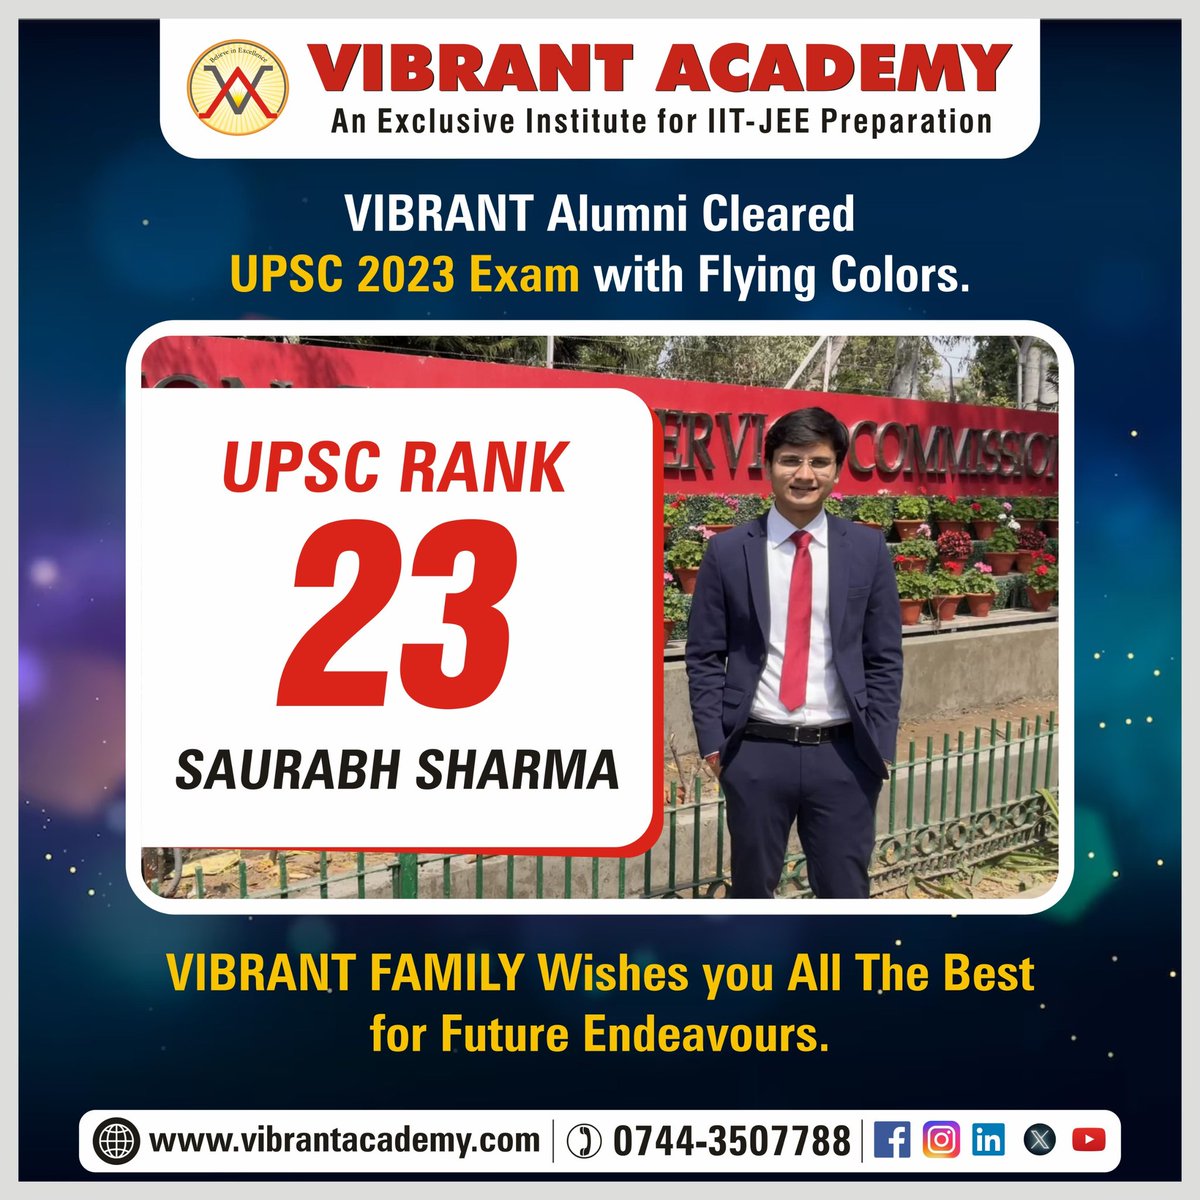 Congratulations🎉to VIBRANT Alumni SAURABH SHARMA👍 for 23 Rank in UPSE Exam✌ 👏

VIBRANT FAMILY Wishes you All The Best for Future Endeavours.✌👏👏

#vibrantacademy #kotacoaching #UPSE #upseexam #iit #jee #iitjeepreparation